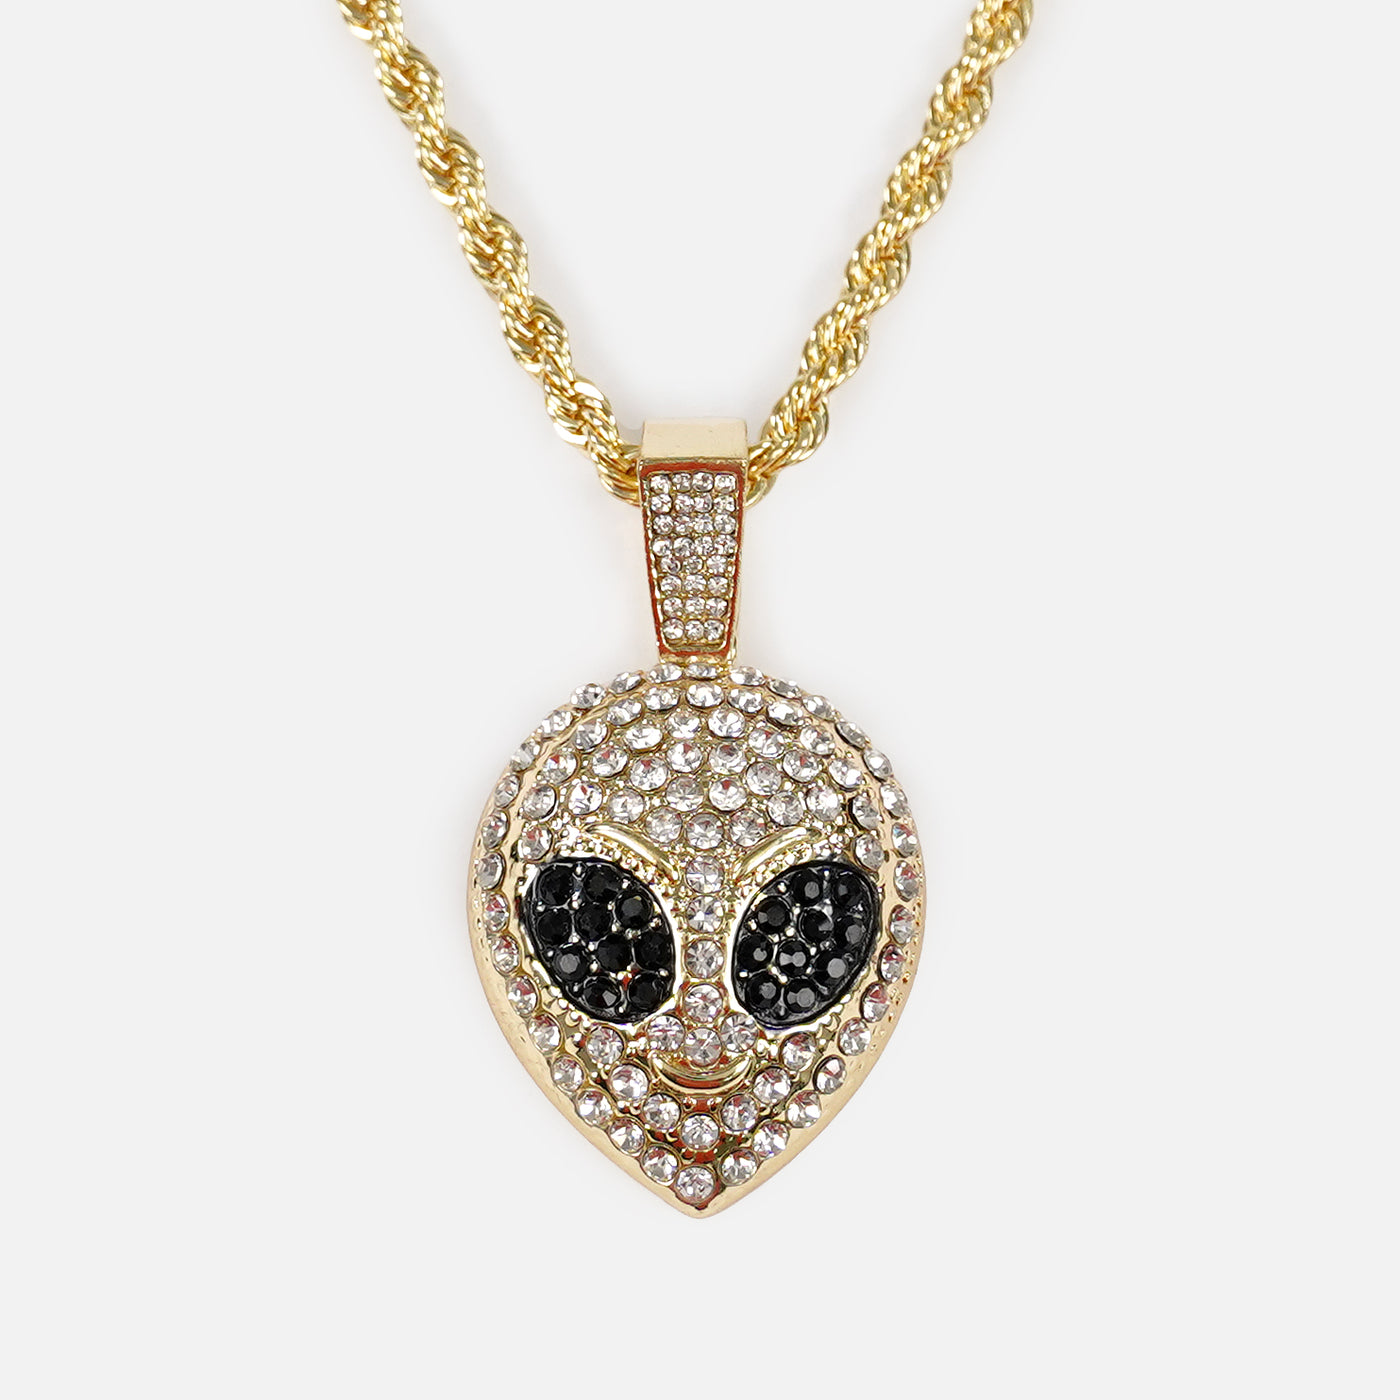 Alien 51 1½" Pendant with Chain Necklace - Gold Plated Stainless Steel